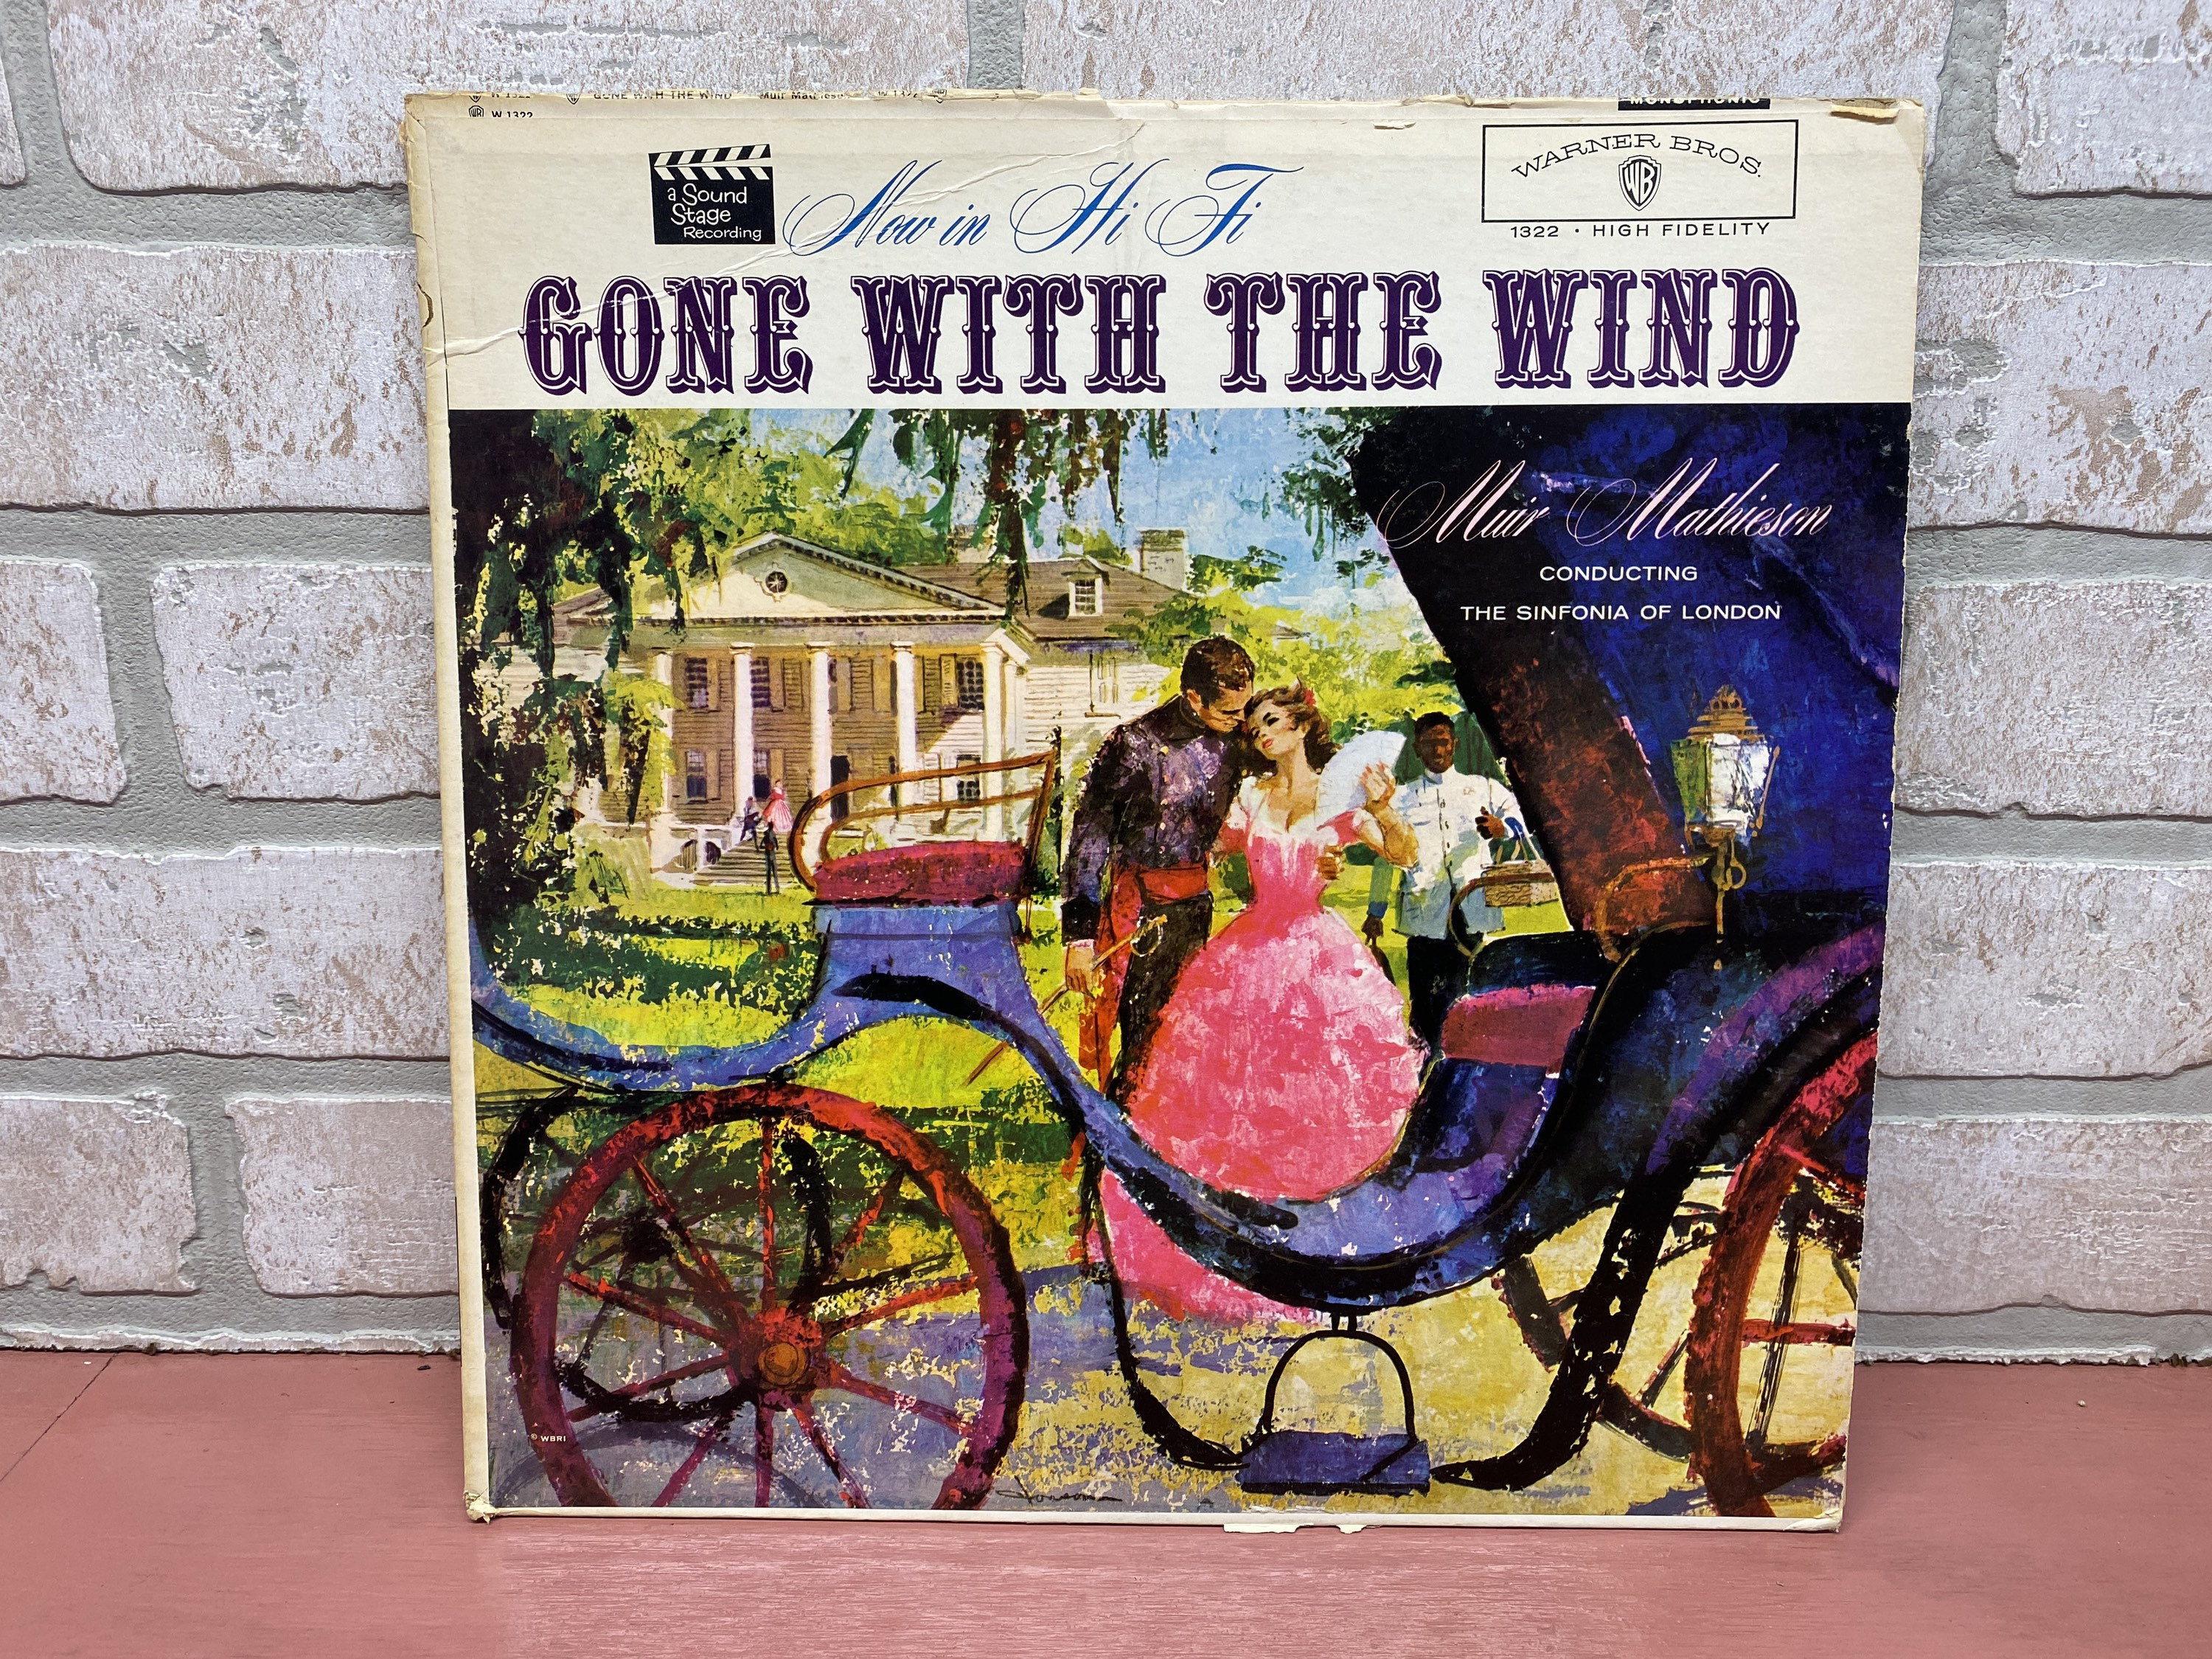 Cine & Musica Los Oscar musicales Disco Vinilo LPSalvat Gone With THe Wind,  Fama